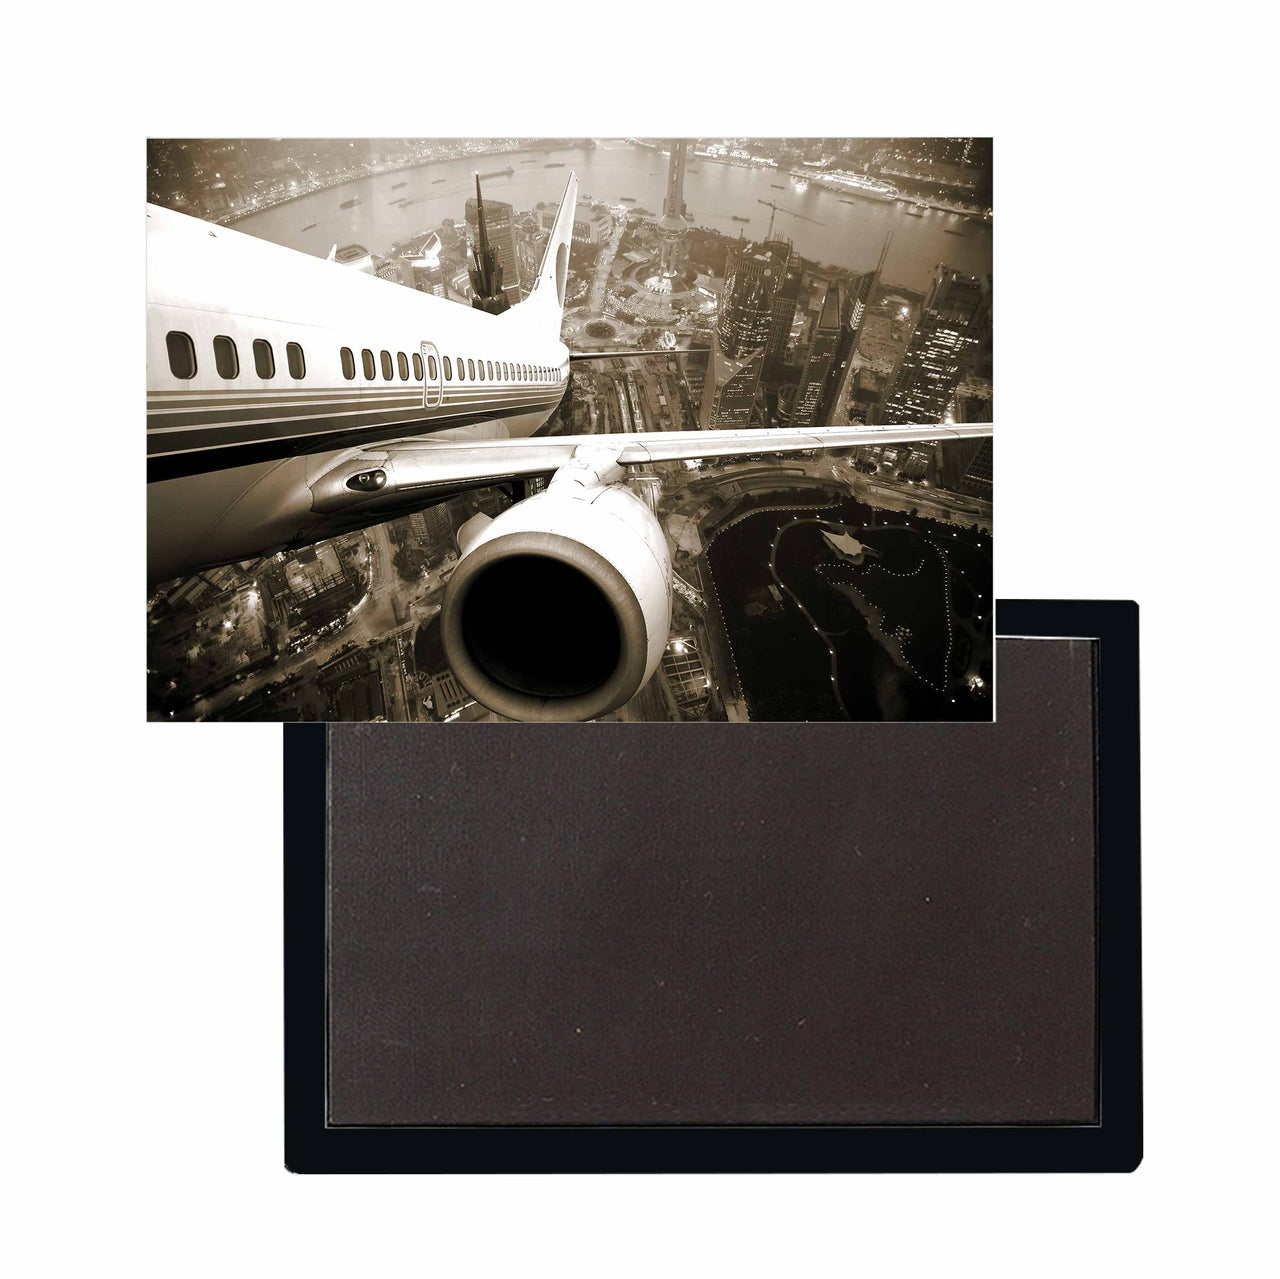 Departing Aircraft & City Scene behind Designed Magnets